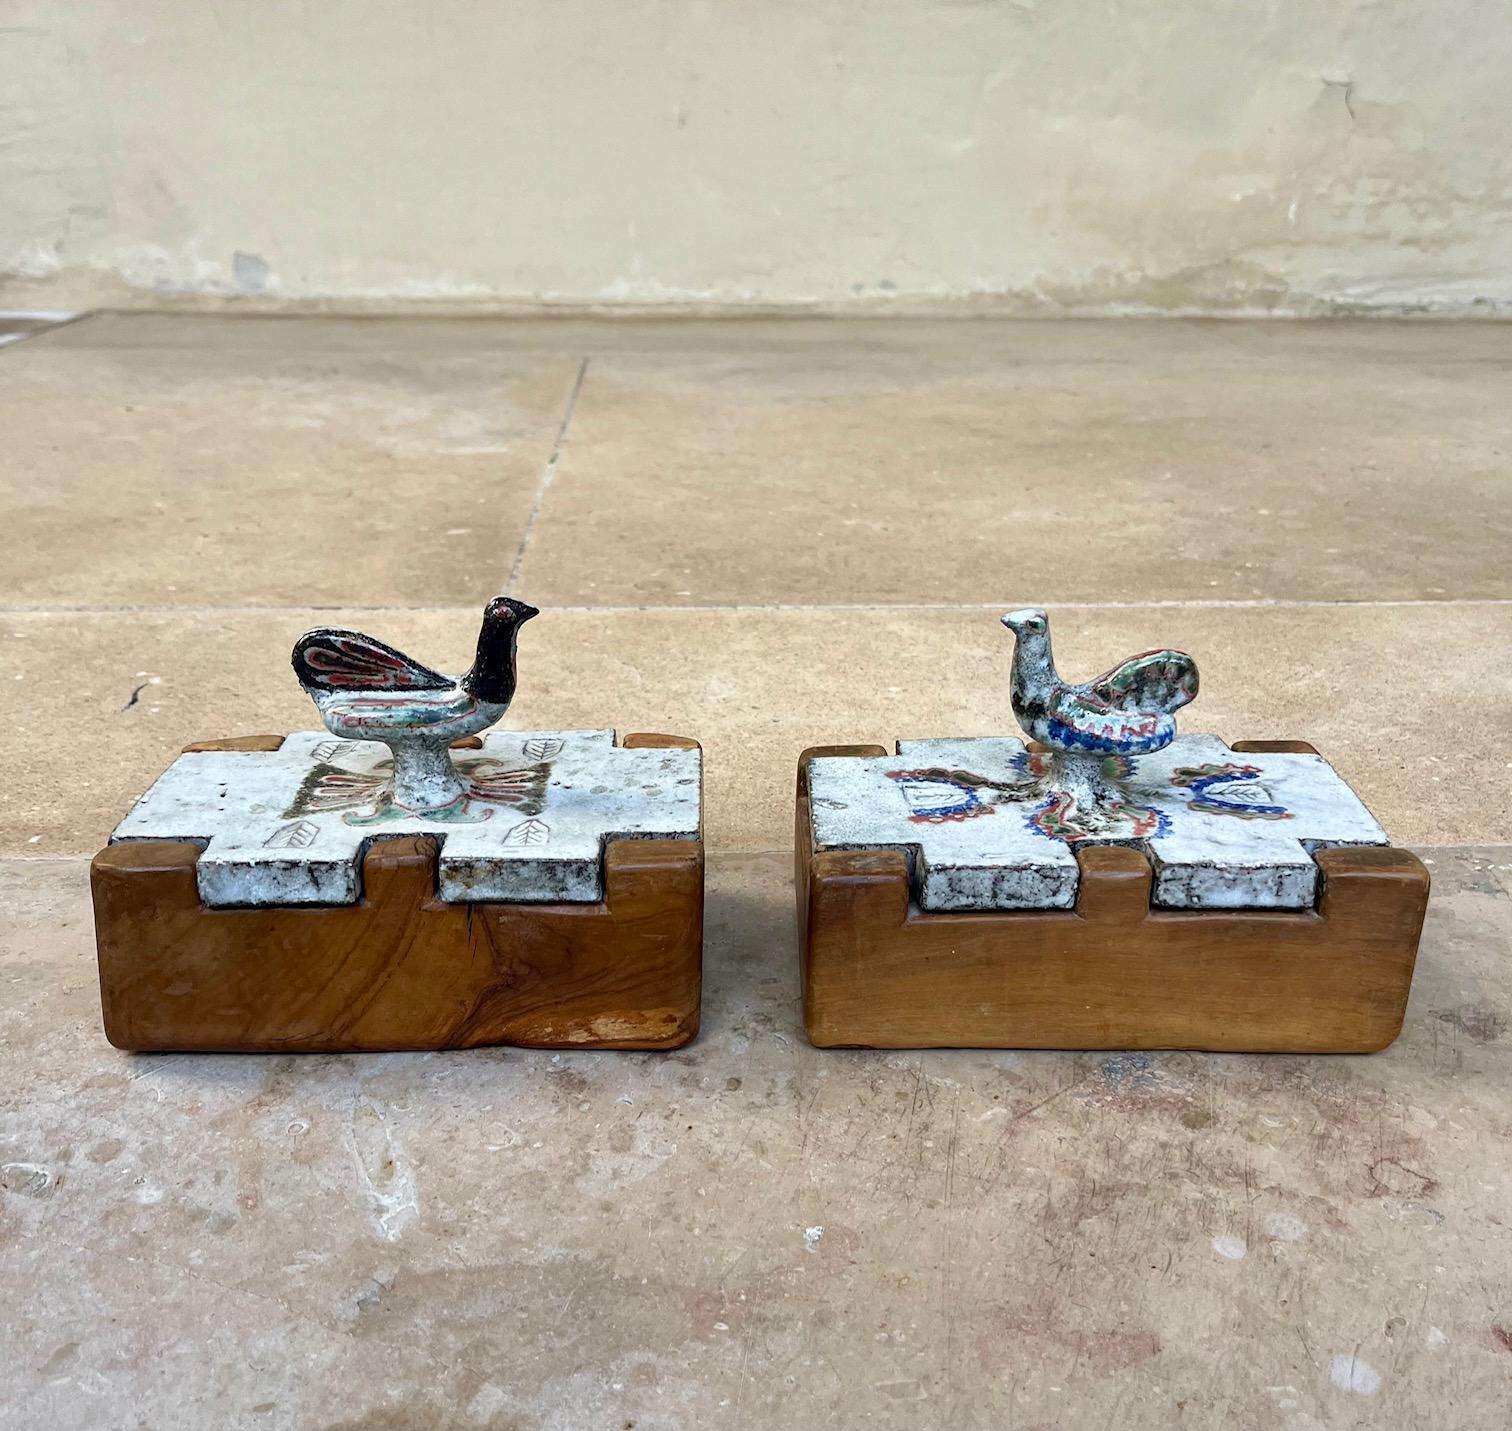 Two rare boxes  by Jean Derval.
Glazed ceramic lids with bird shaped handle, olive wood box.
Small variations in decoration and bird's shapes and sizes 
